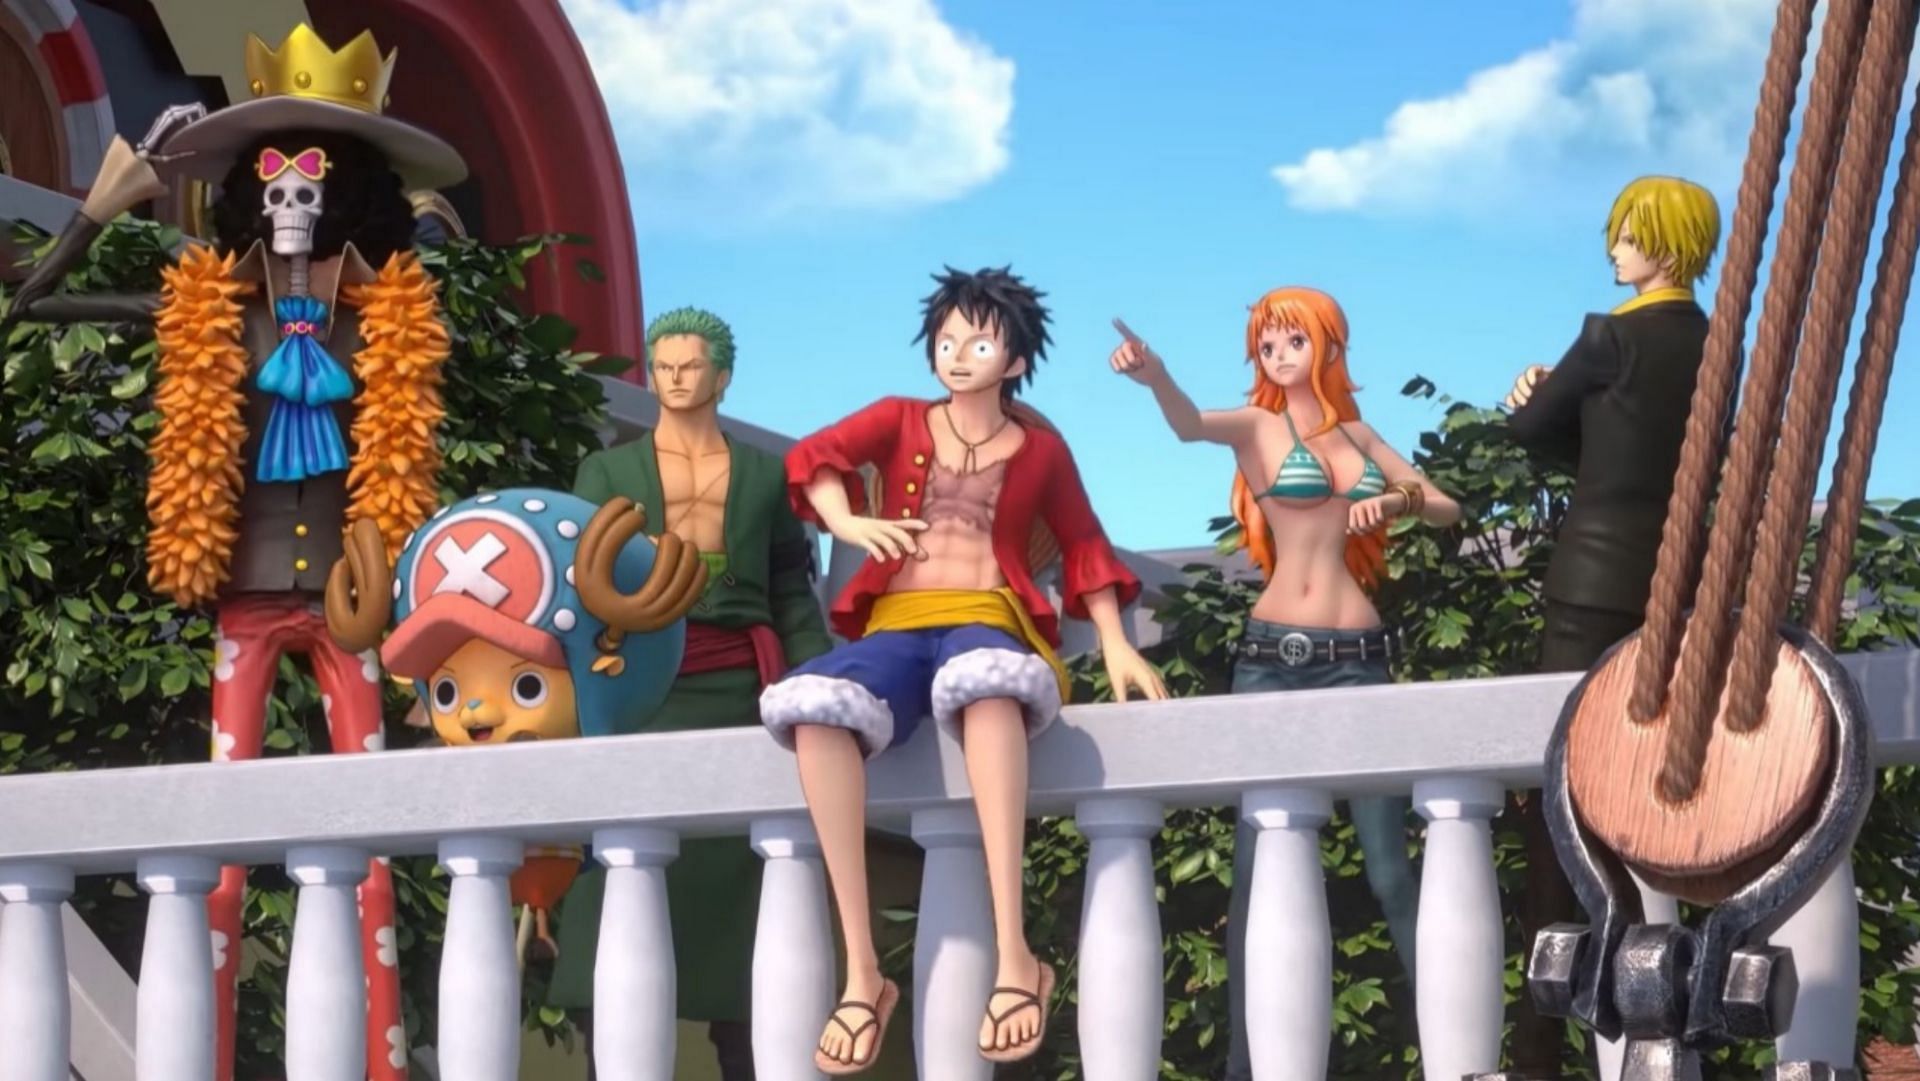 Which members of the Straw Hat Pirates are playable in One Piece Odyssey?